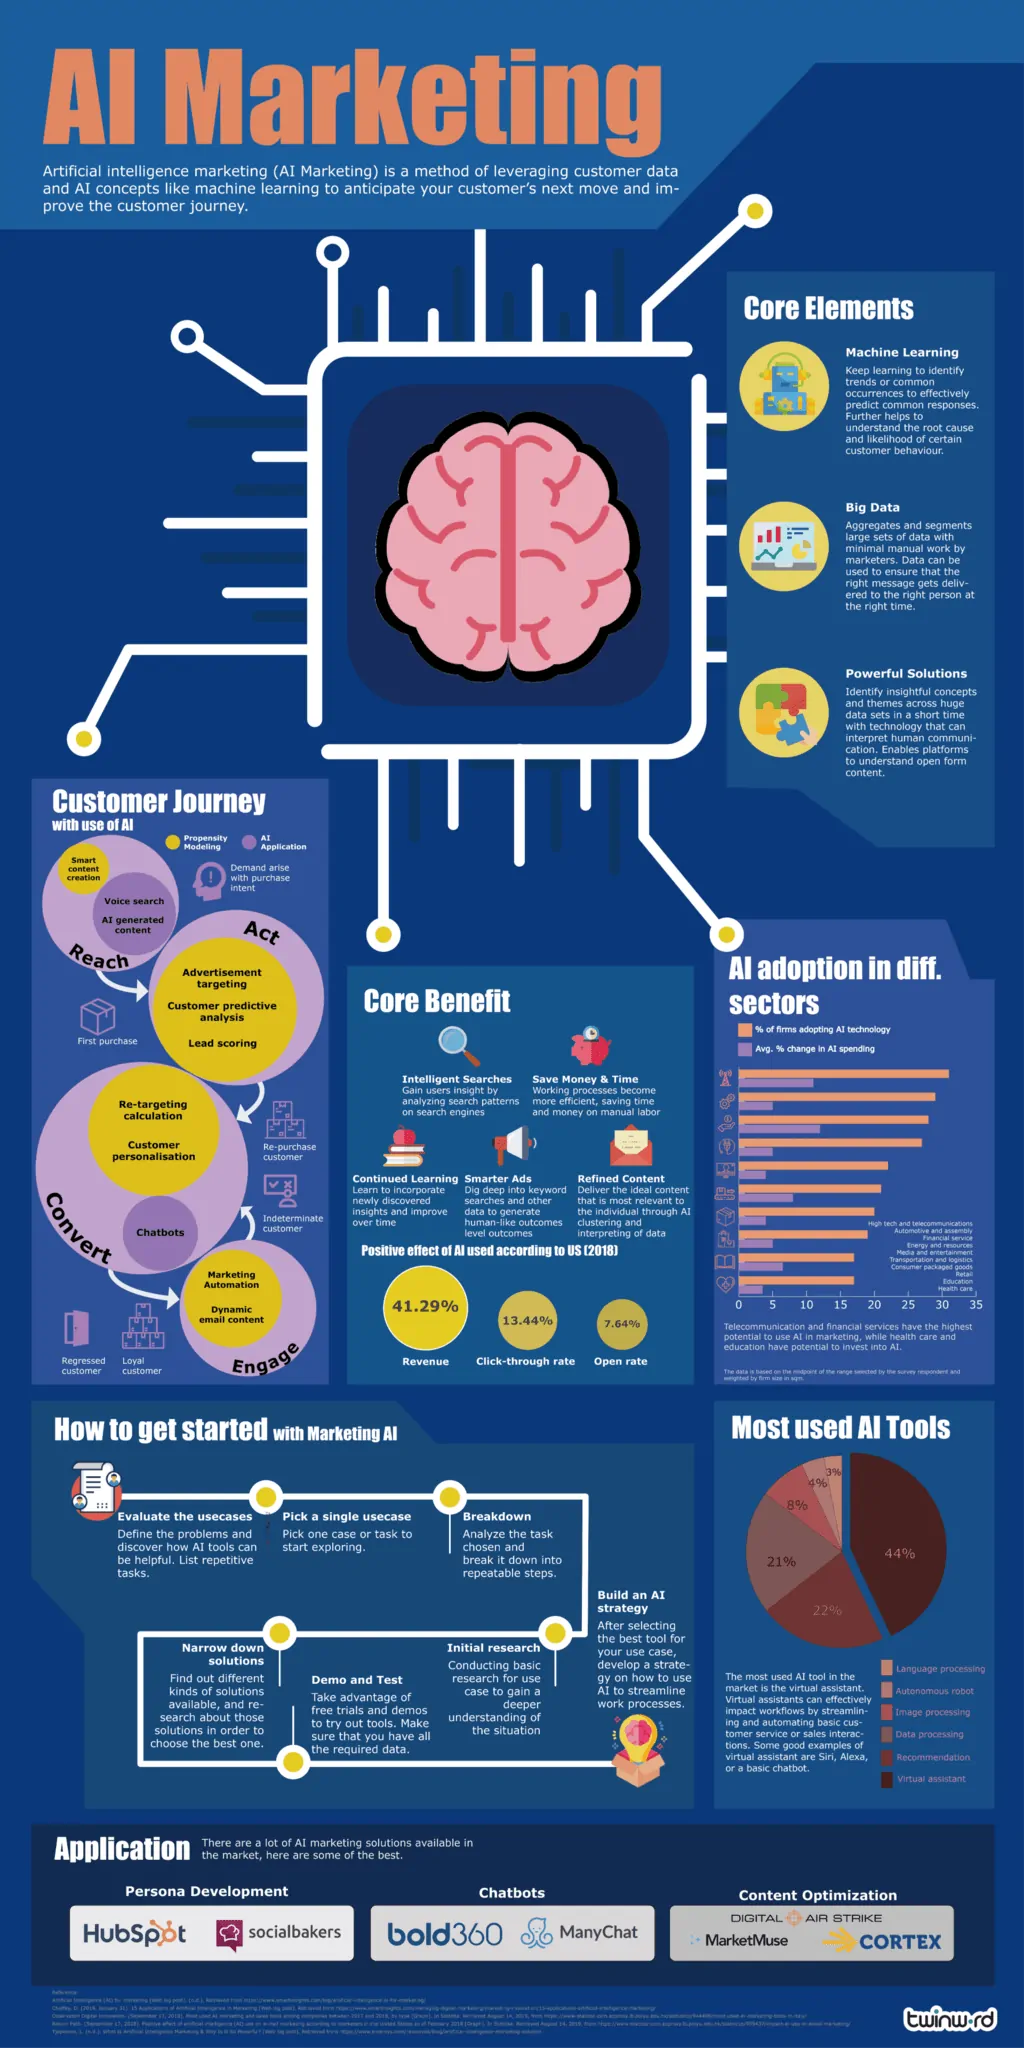 AI marketing Infographic, showing the benefits, core elements, and most used AI marketing tools, and much more.